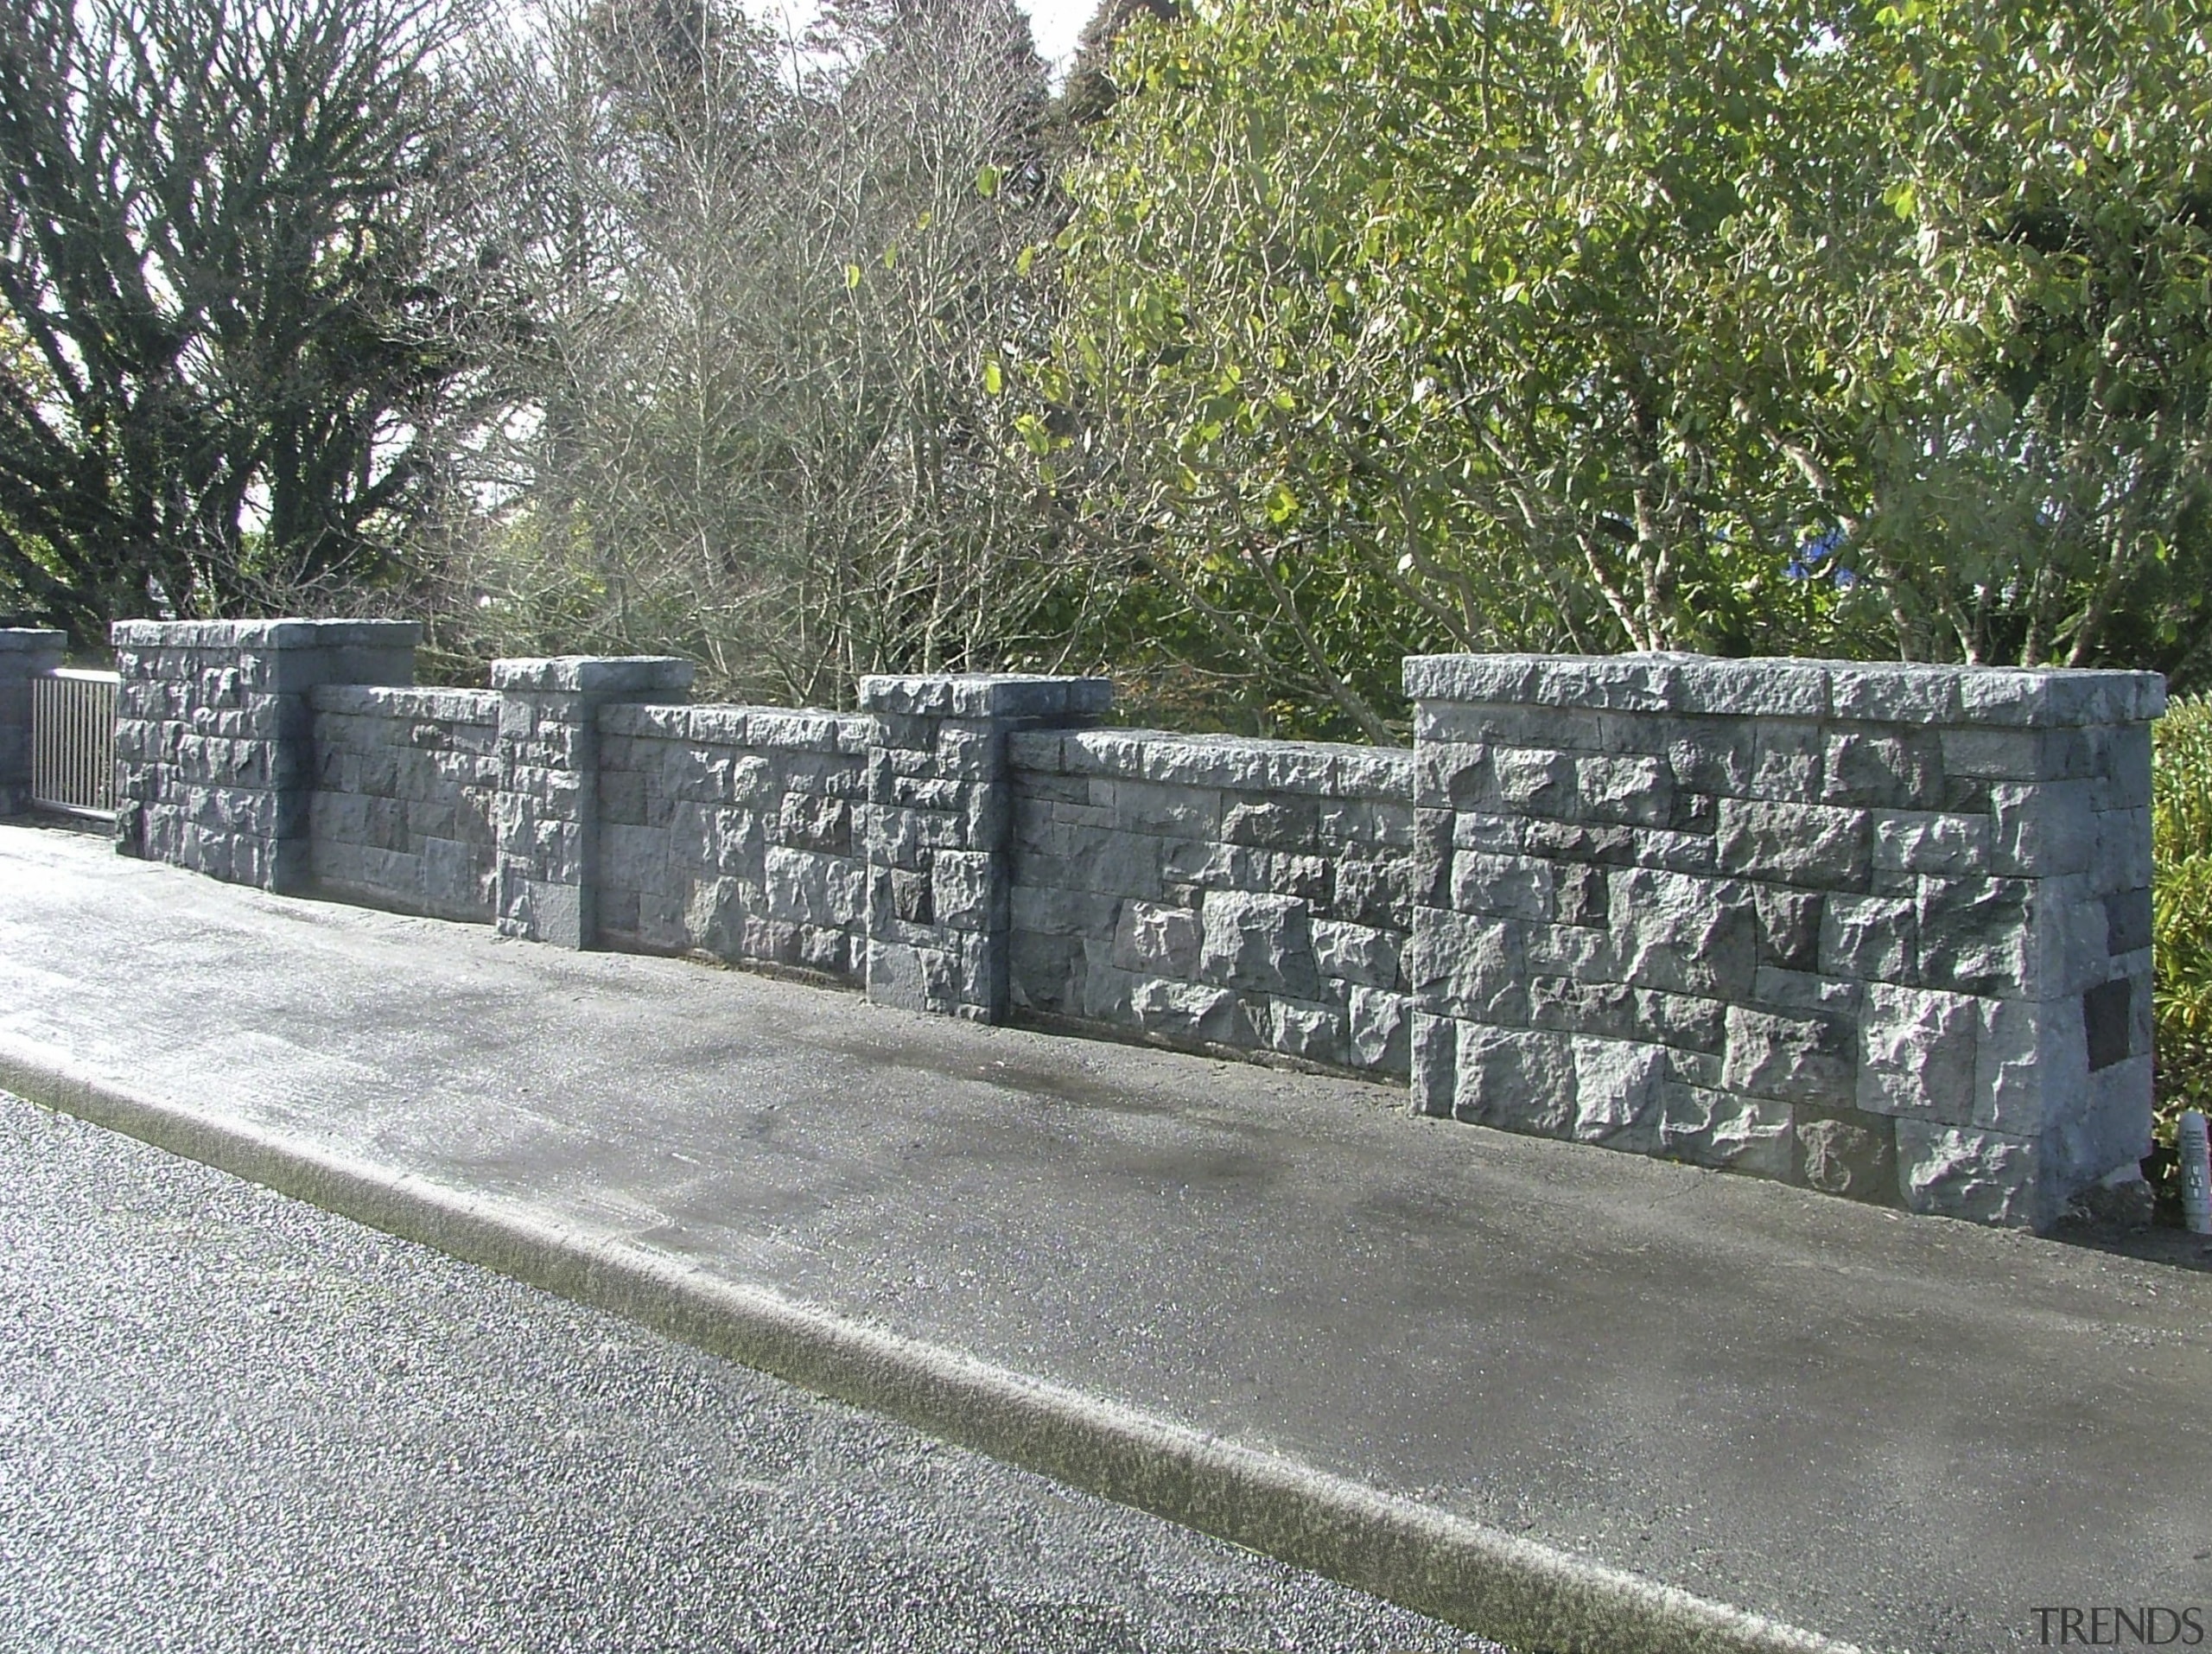 View of the stone balustrade of the Victoria fence, memorial, road surface, stone wall, walkway, wall, gray